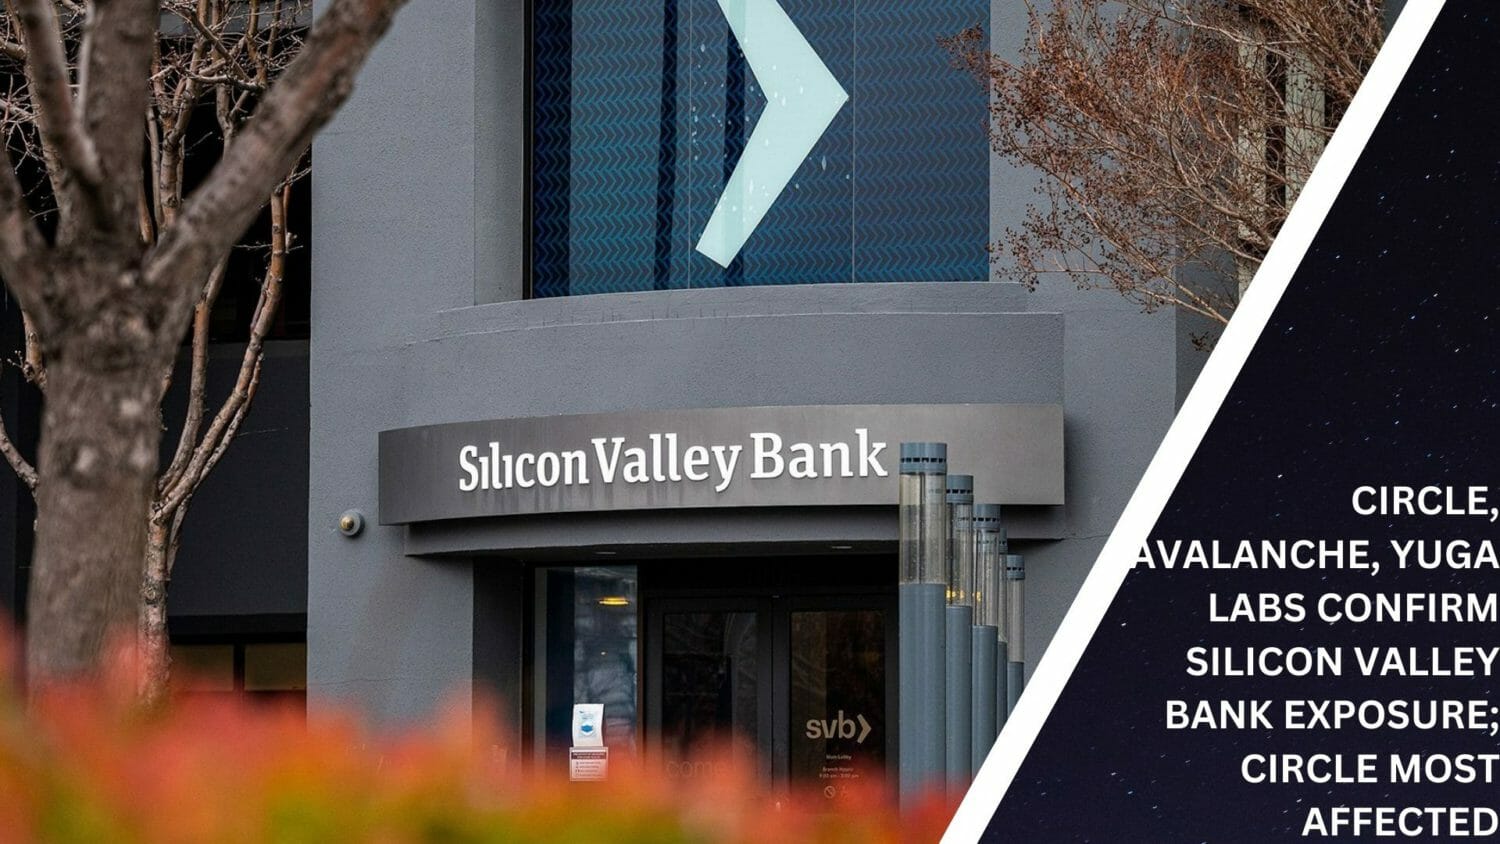 Circle,Avalanche, Yuga Labs Confirm Silicon Valley Bank Exposure; Circle Most Affected